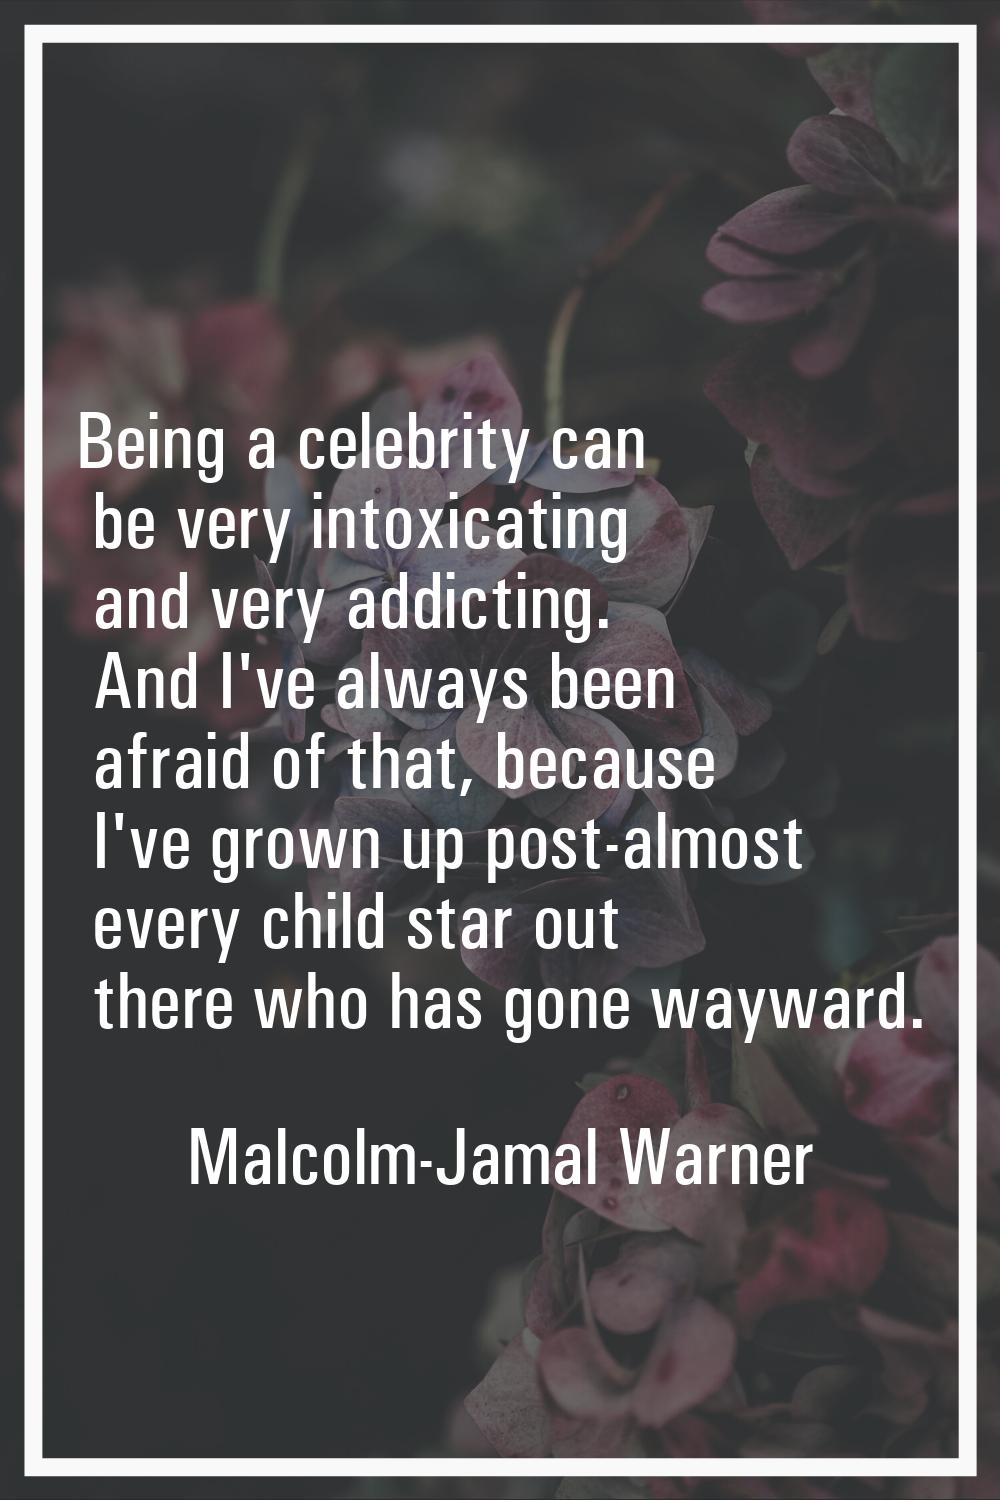 Being a celebrity can be very intoxicating and very addicting. And I've always been afraid of that,